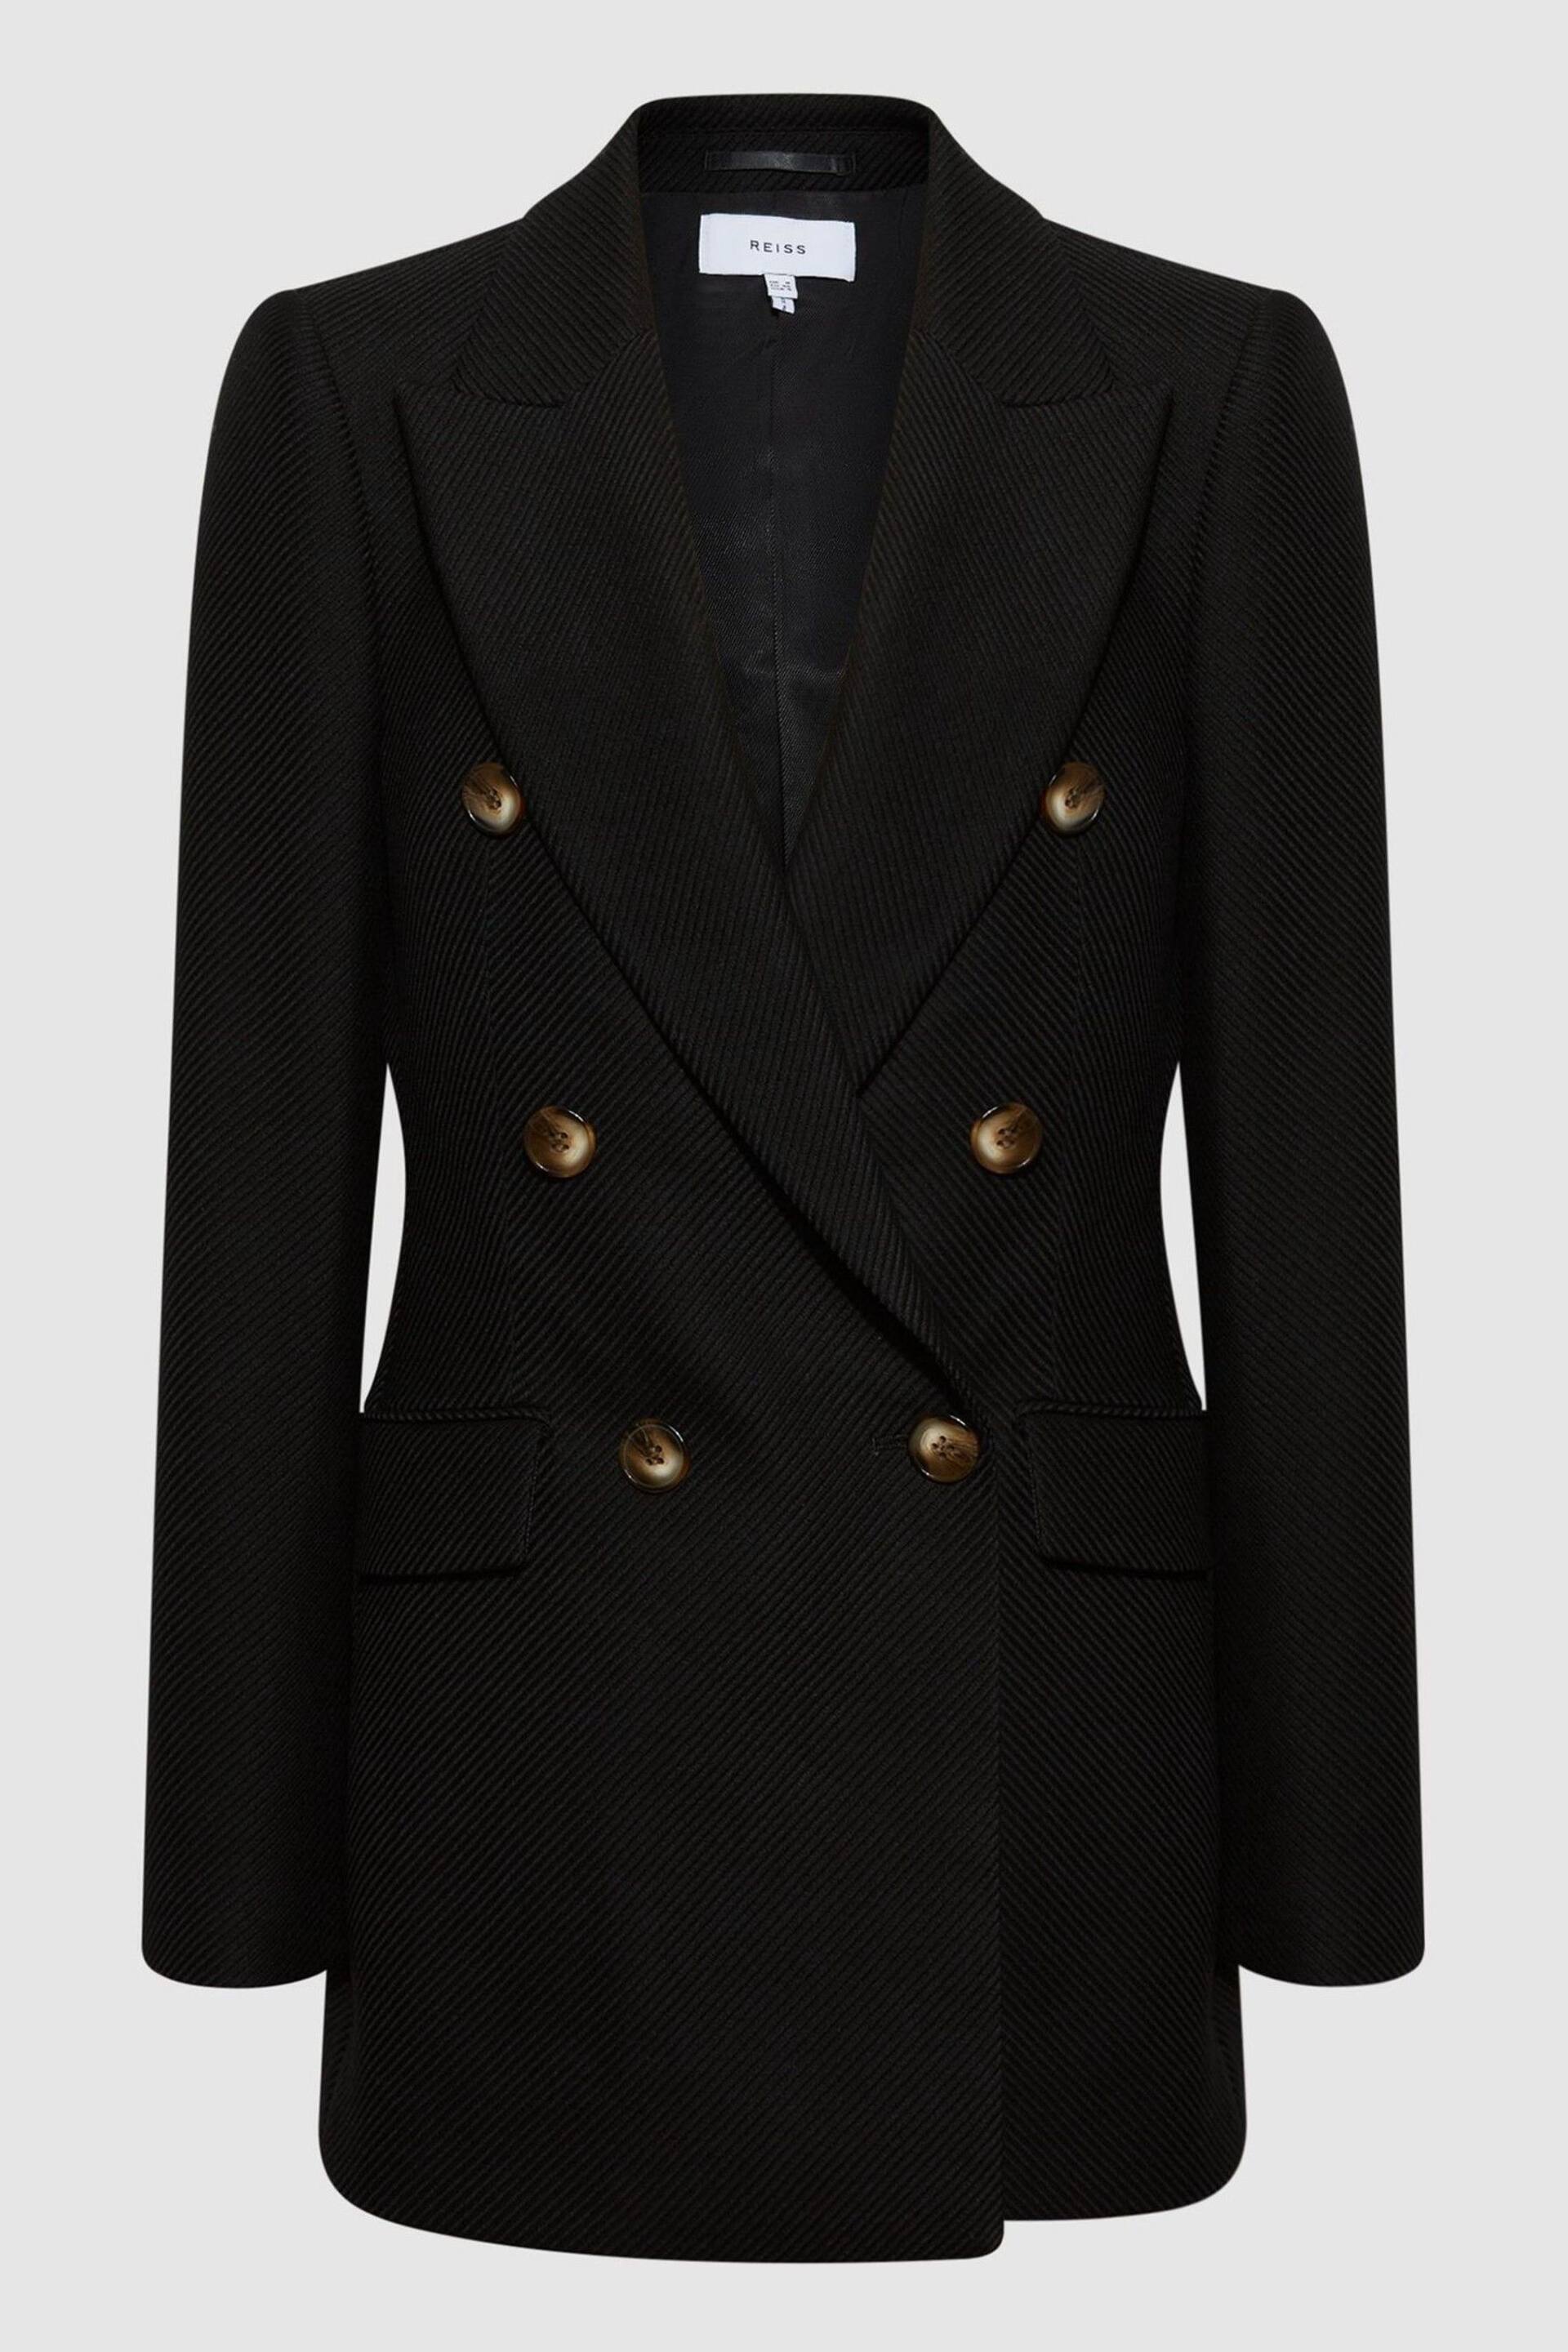 Reiss Black Laura Double Breasted Twill Blazer - Image 2 of 11